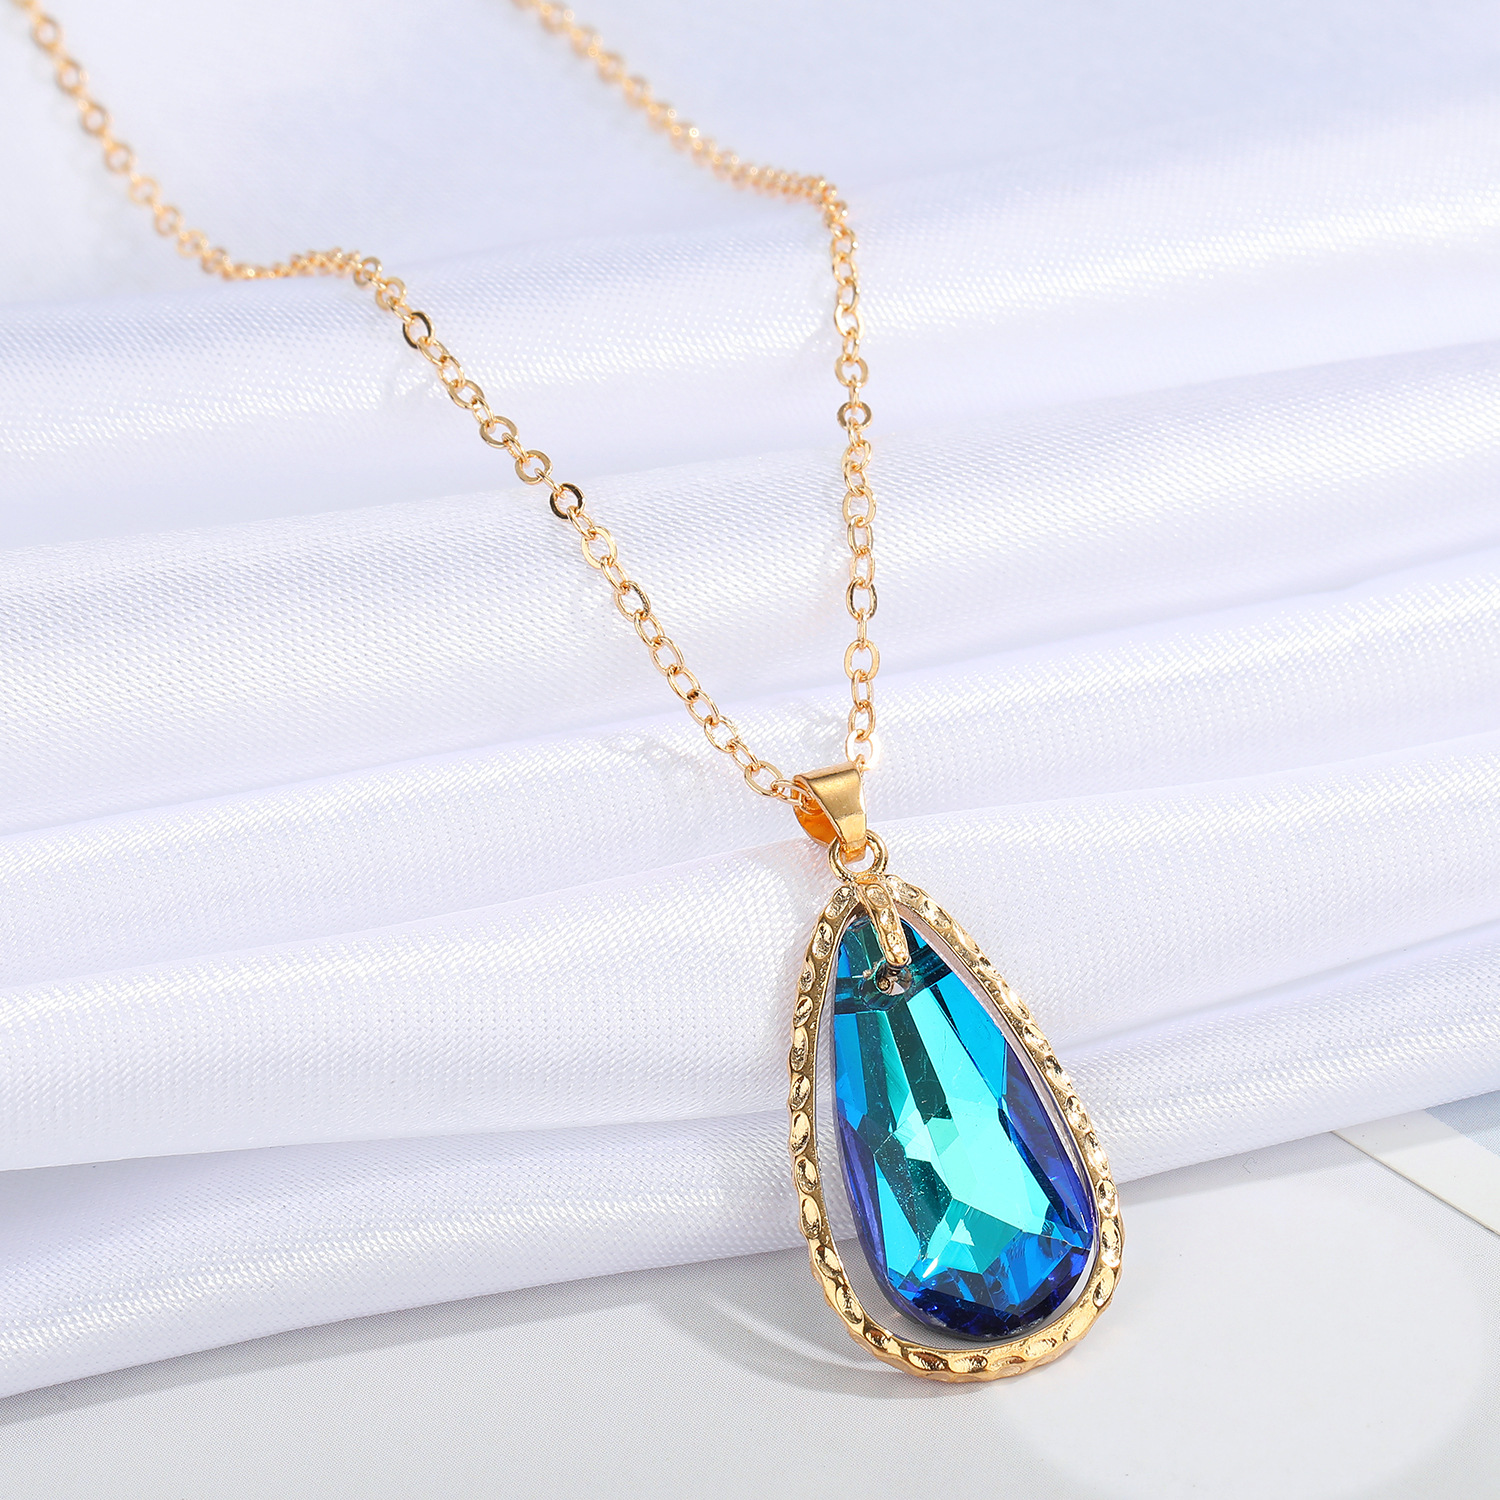 European CrossBorder Sold Jewelry Blue Crystal Glass Necklace Simple Star and Moon Pendant Clavicle Chain Female Necklacepicture2